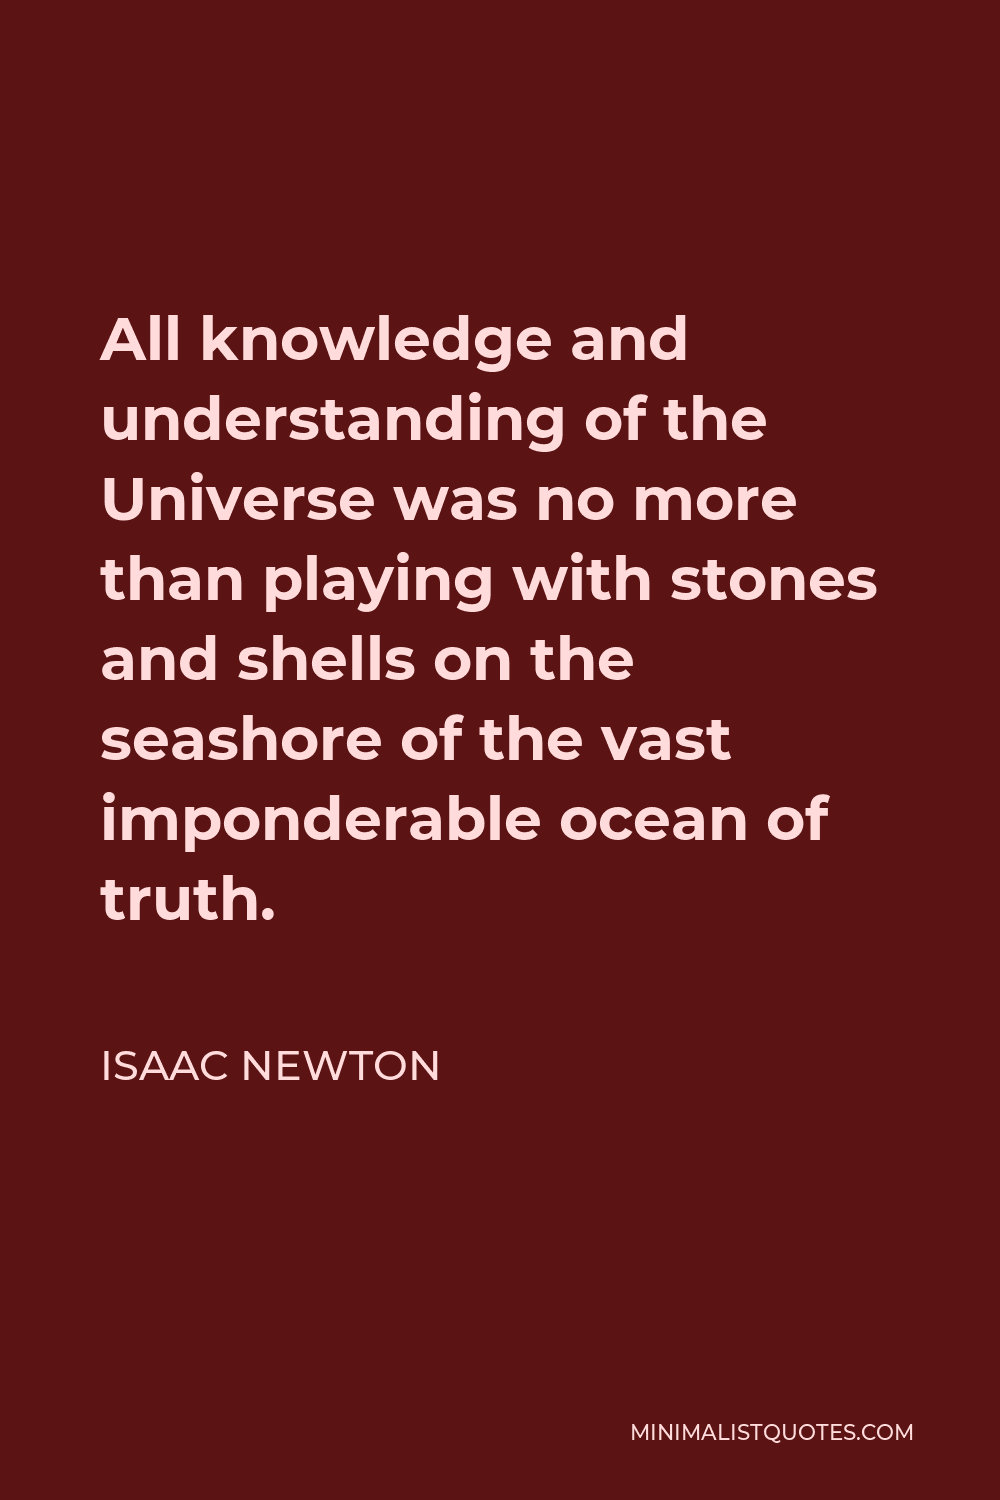 Isaac Newton Quote - All knowledge and understanding of the Universe was no more than playing with stones and shells on the seashore of the vast imponderable ocean of truth.